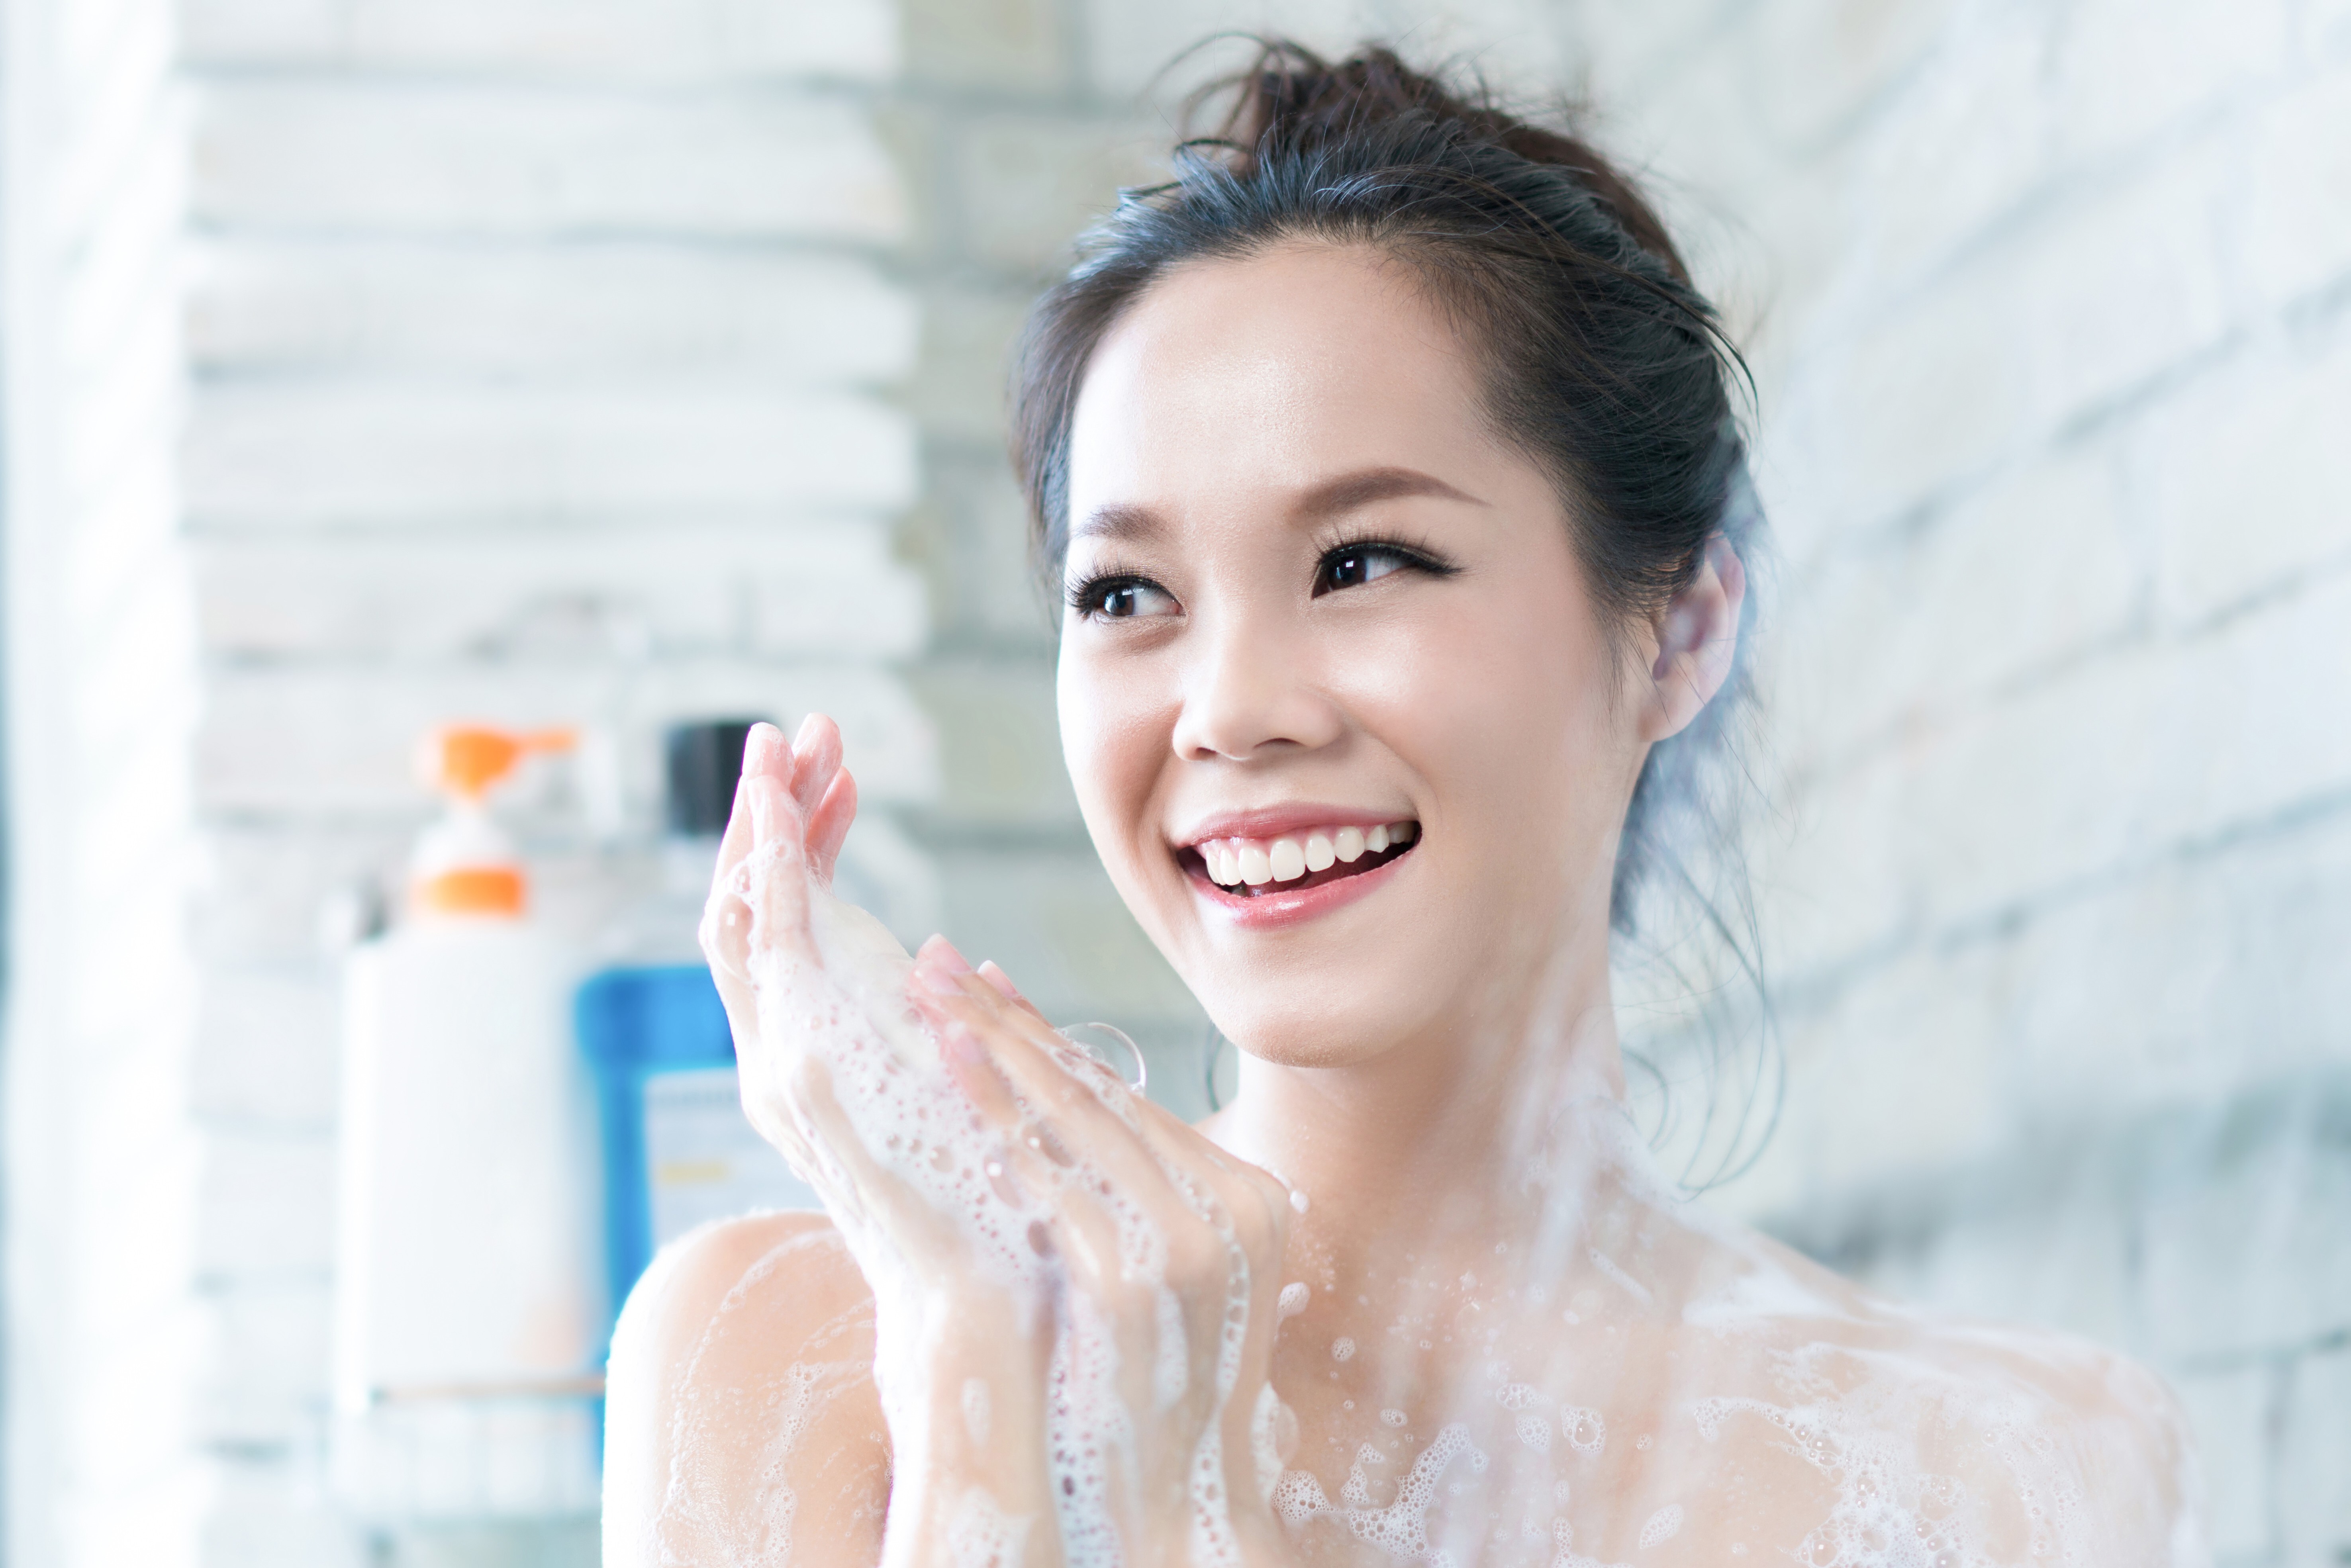 Cleansing twice a day is the starting point for achieving glass skin.